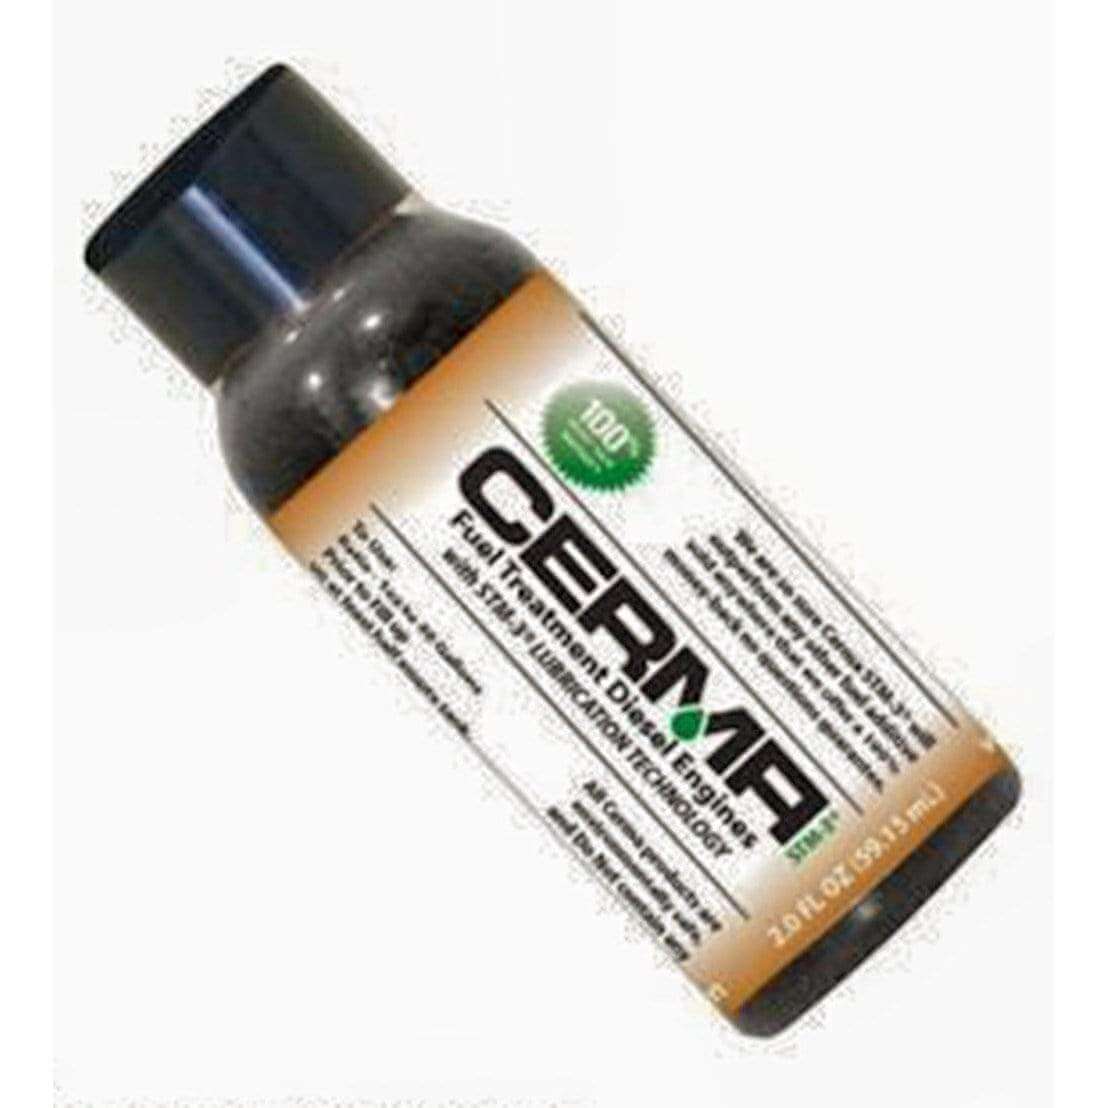 Cerma Ceramic Fuel Treatment for Diesel Engines at $10.95 only from cermatreatment.com